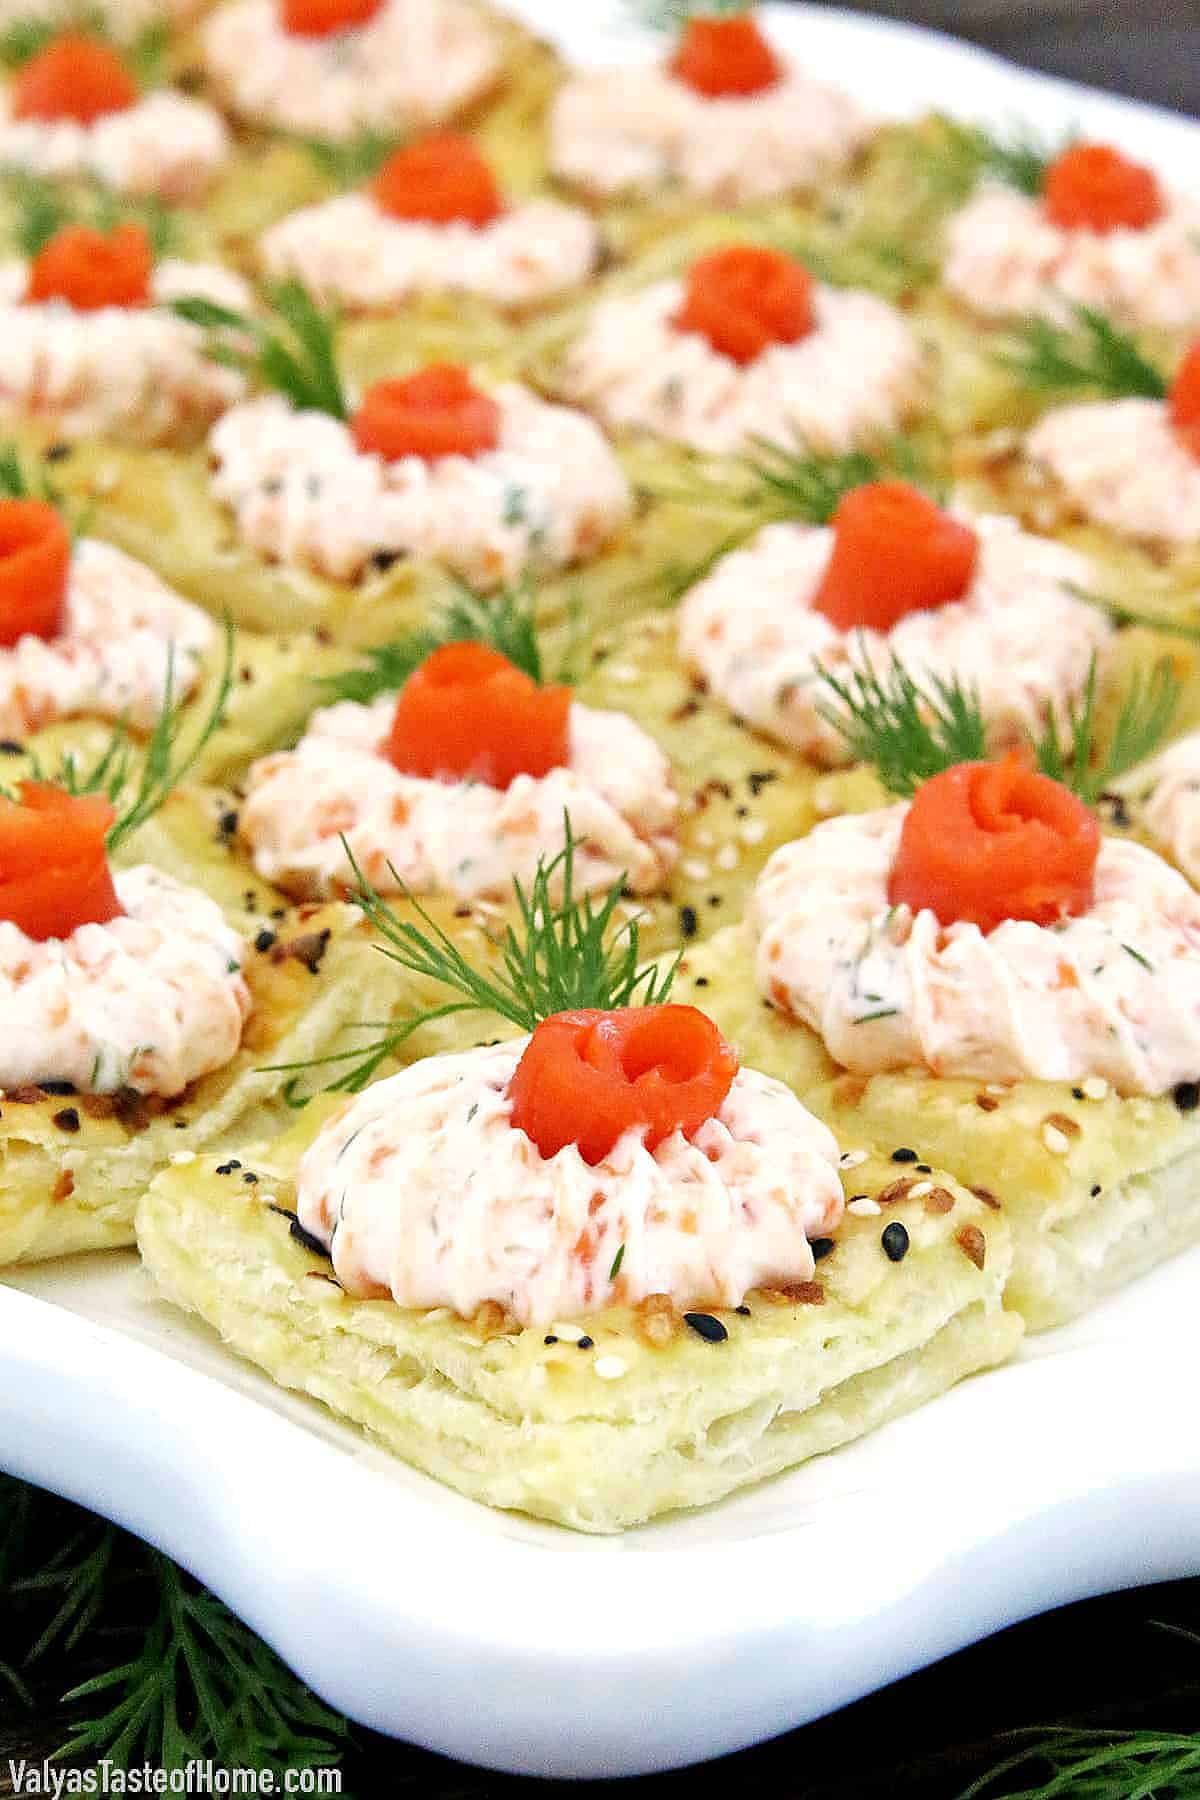 These delicious Smoked Salmon Appetizers are the most perfect salmon bites you’ll ever have! Not only are they incredibly beautiful and elegant, but they taste amazing too!